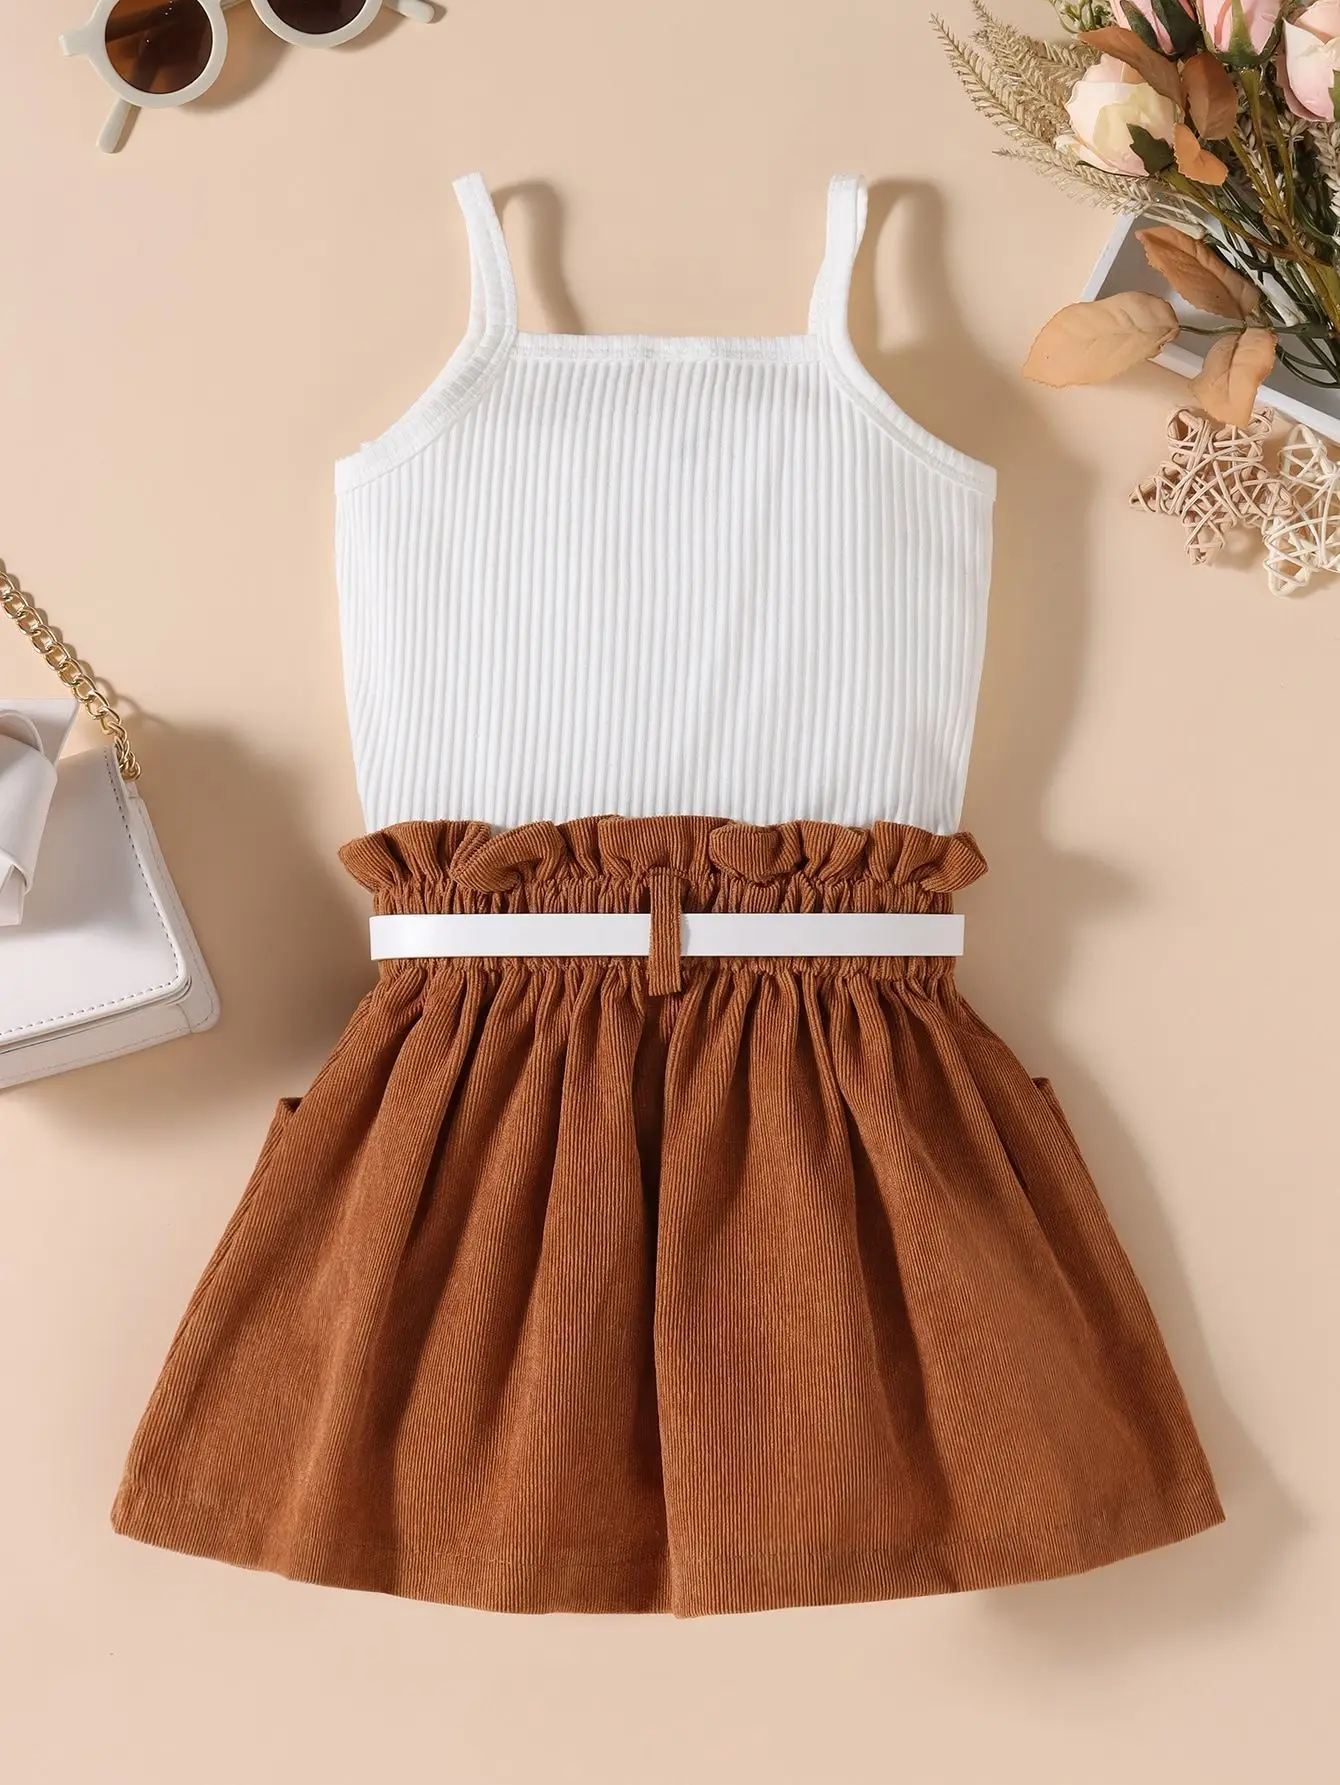 New fashion toddler girls clothing sexy sleeveless tops+skirts+belt boutique 3pcs children'c clothing kids outfits